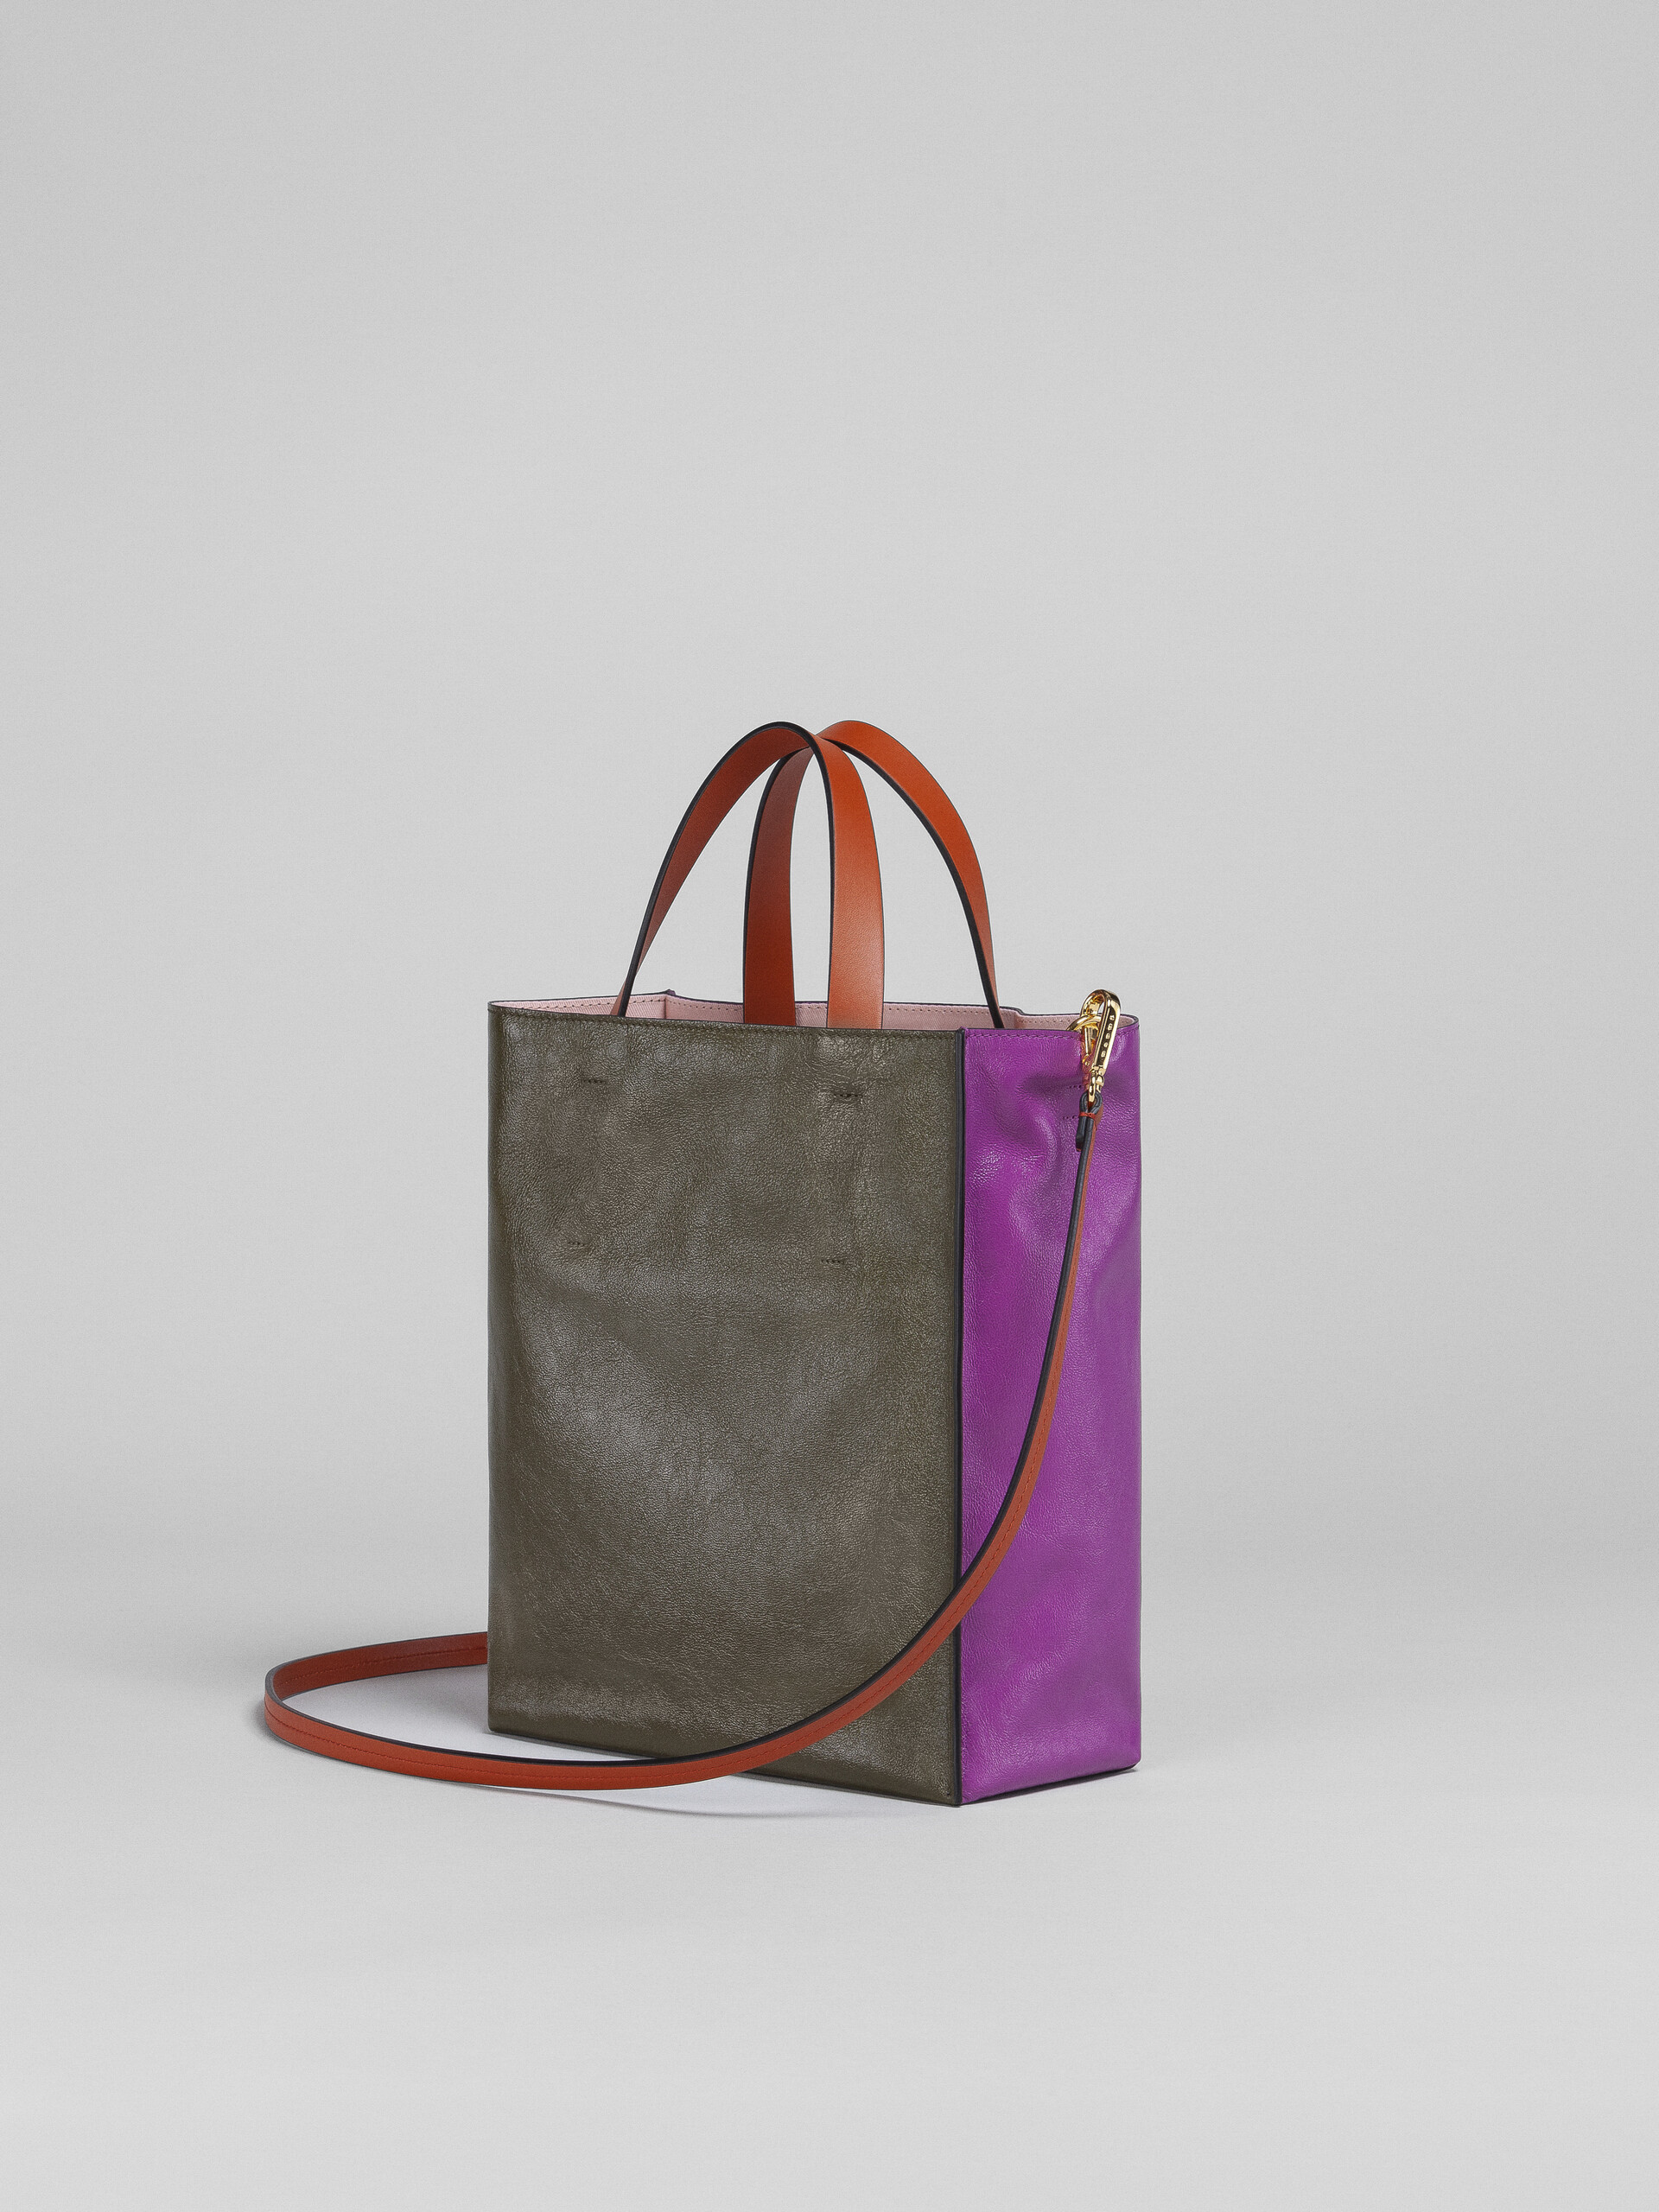 MUSEO SOFT small bag in fuchsia and green leather - Shopping Bags - Image 3